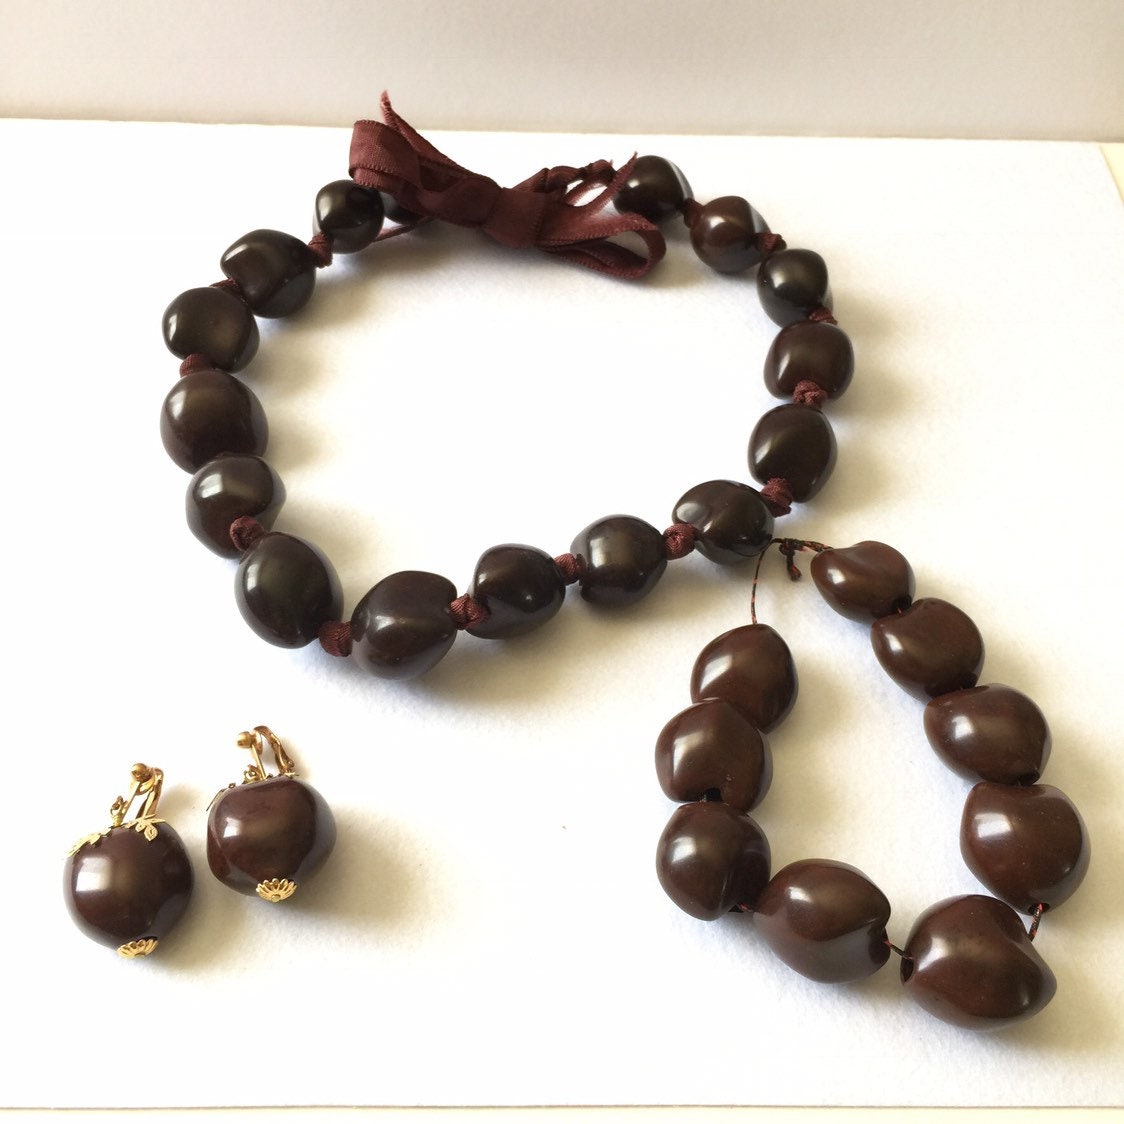 Black Kukui nuts Necklace in San Diego CA - Flowers Of Point Loma